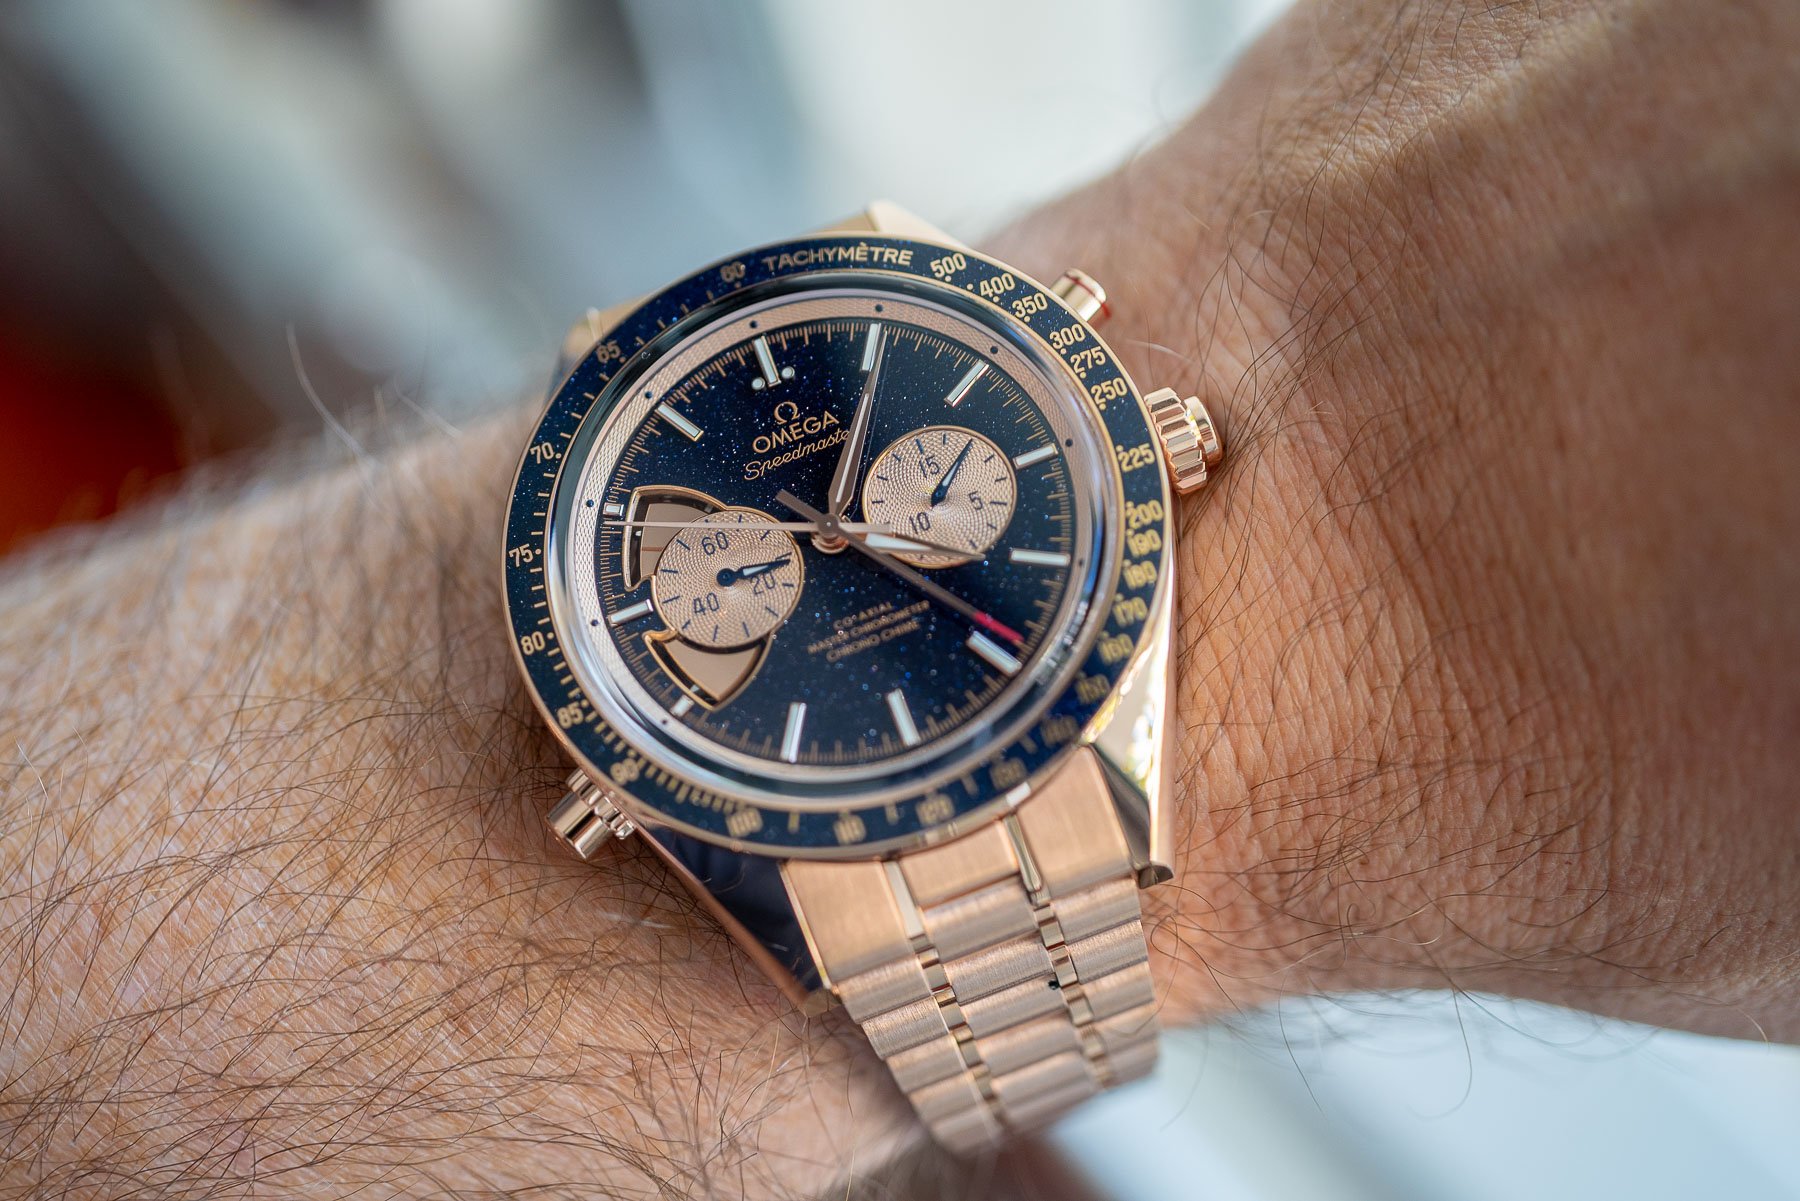 So this is what it is!!! The Speedmaster Chrono Chime in 18k Sedna